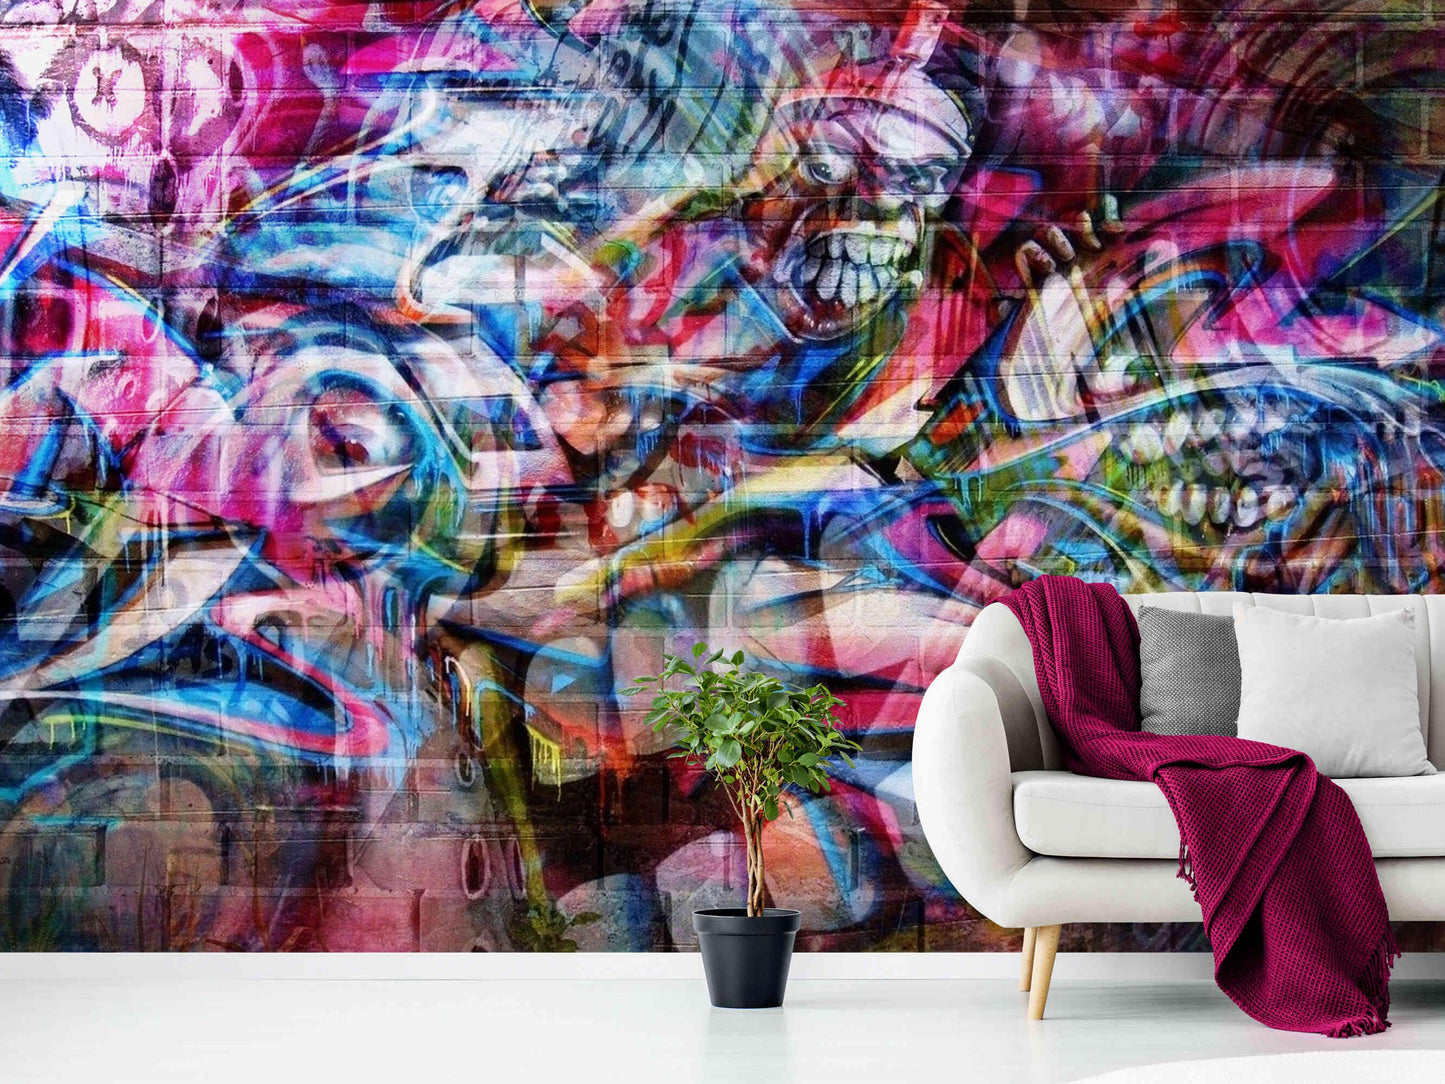 Eerie urban landscape captured in a scary graffiti art wall mural, invoking a sense of mystery.